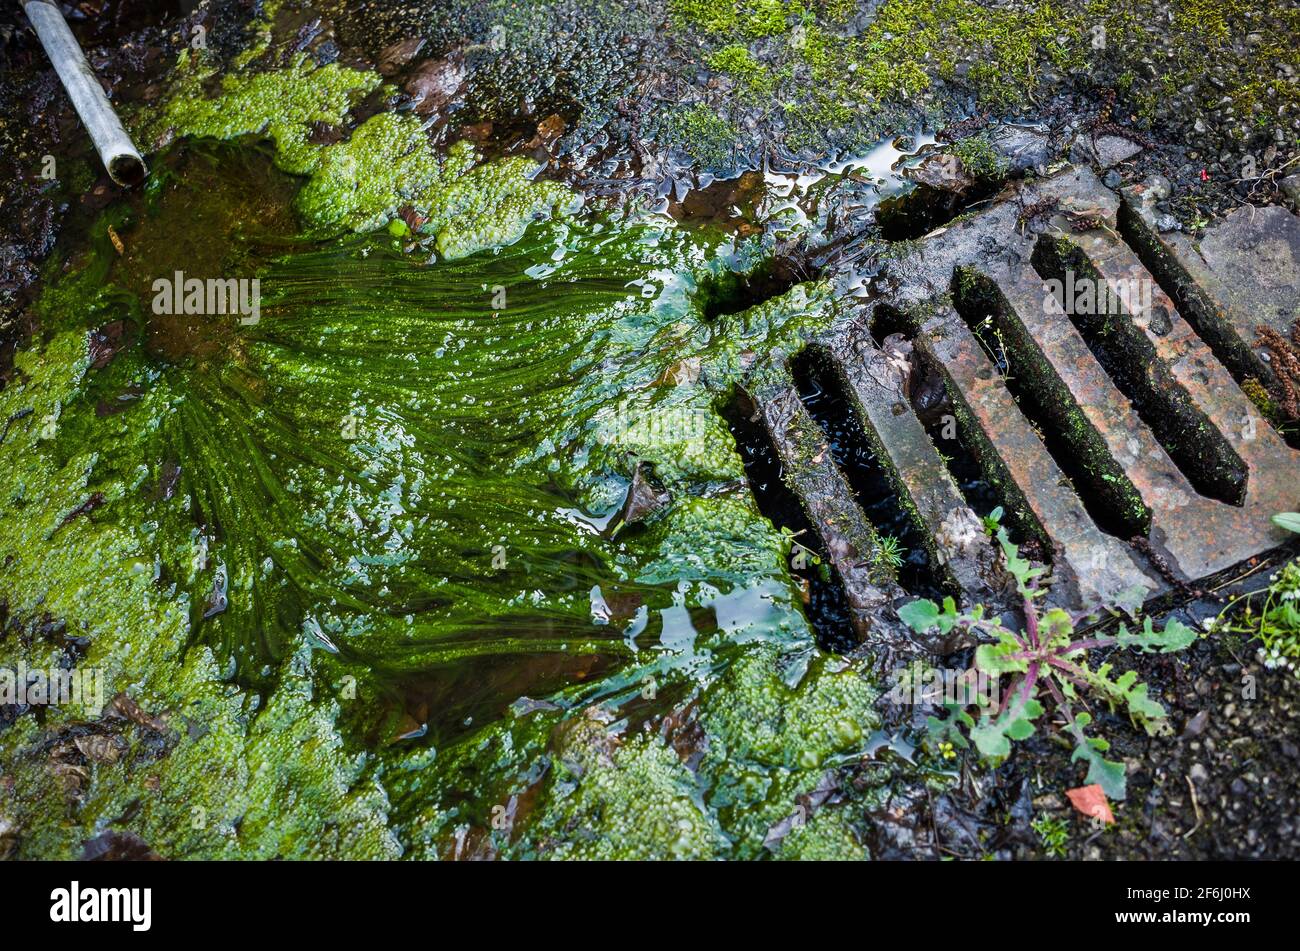 Green slime and trickling water from an old pipe into a drain. Stock Photo